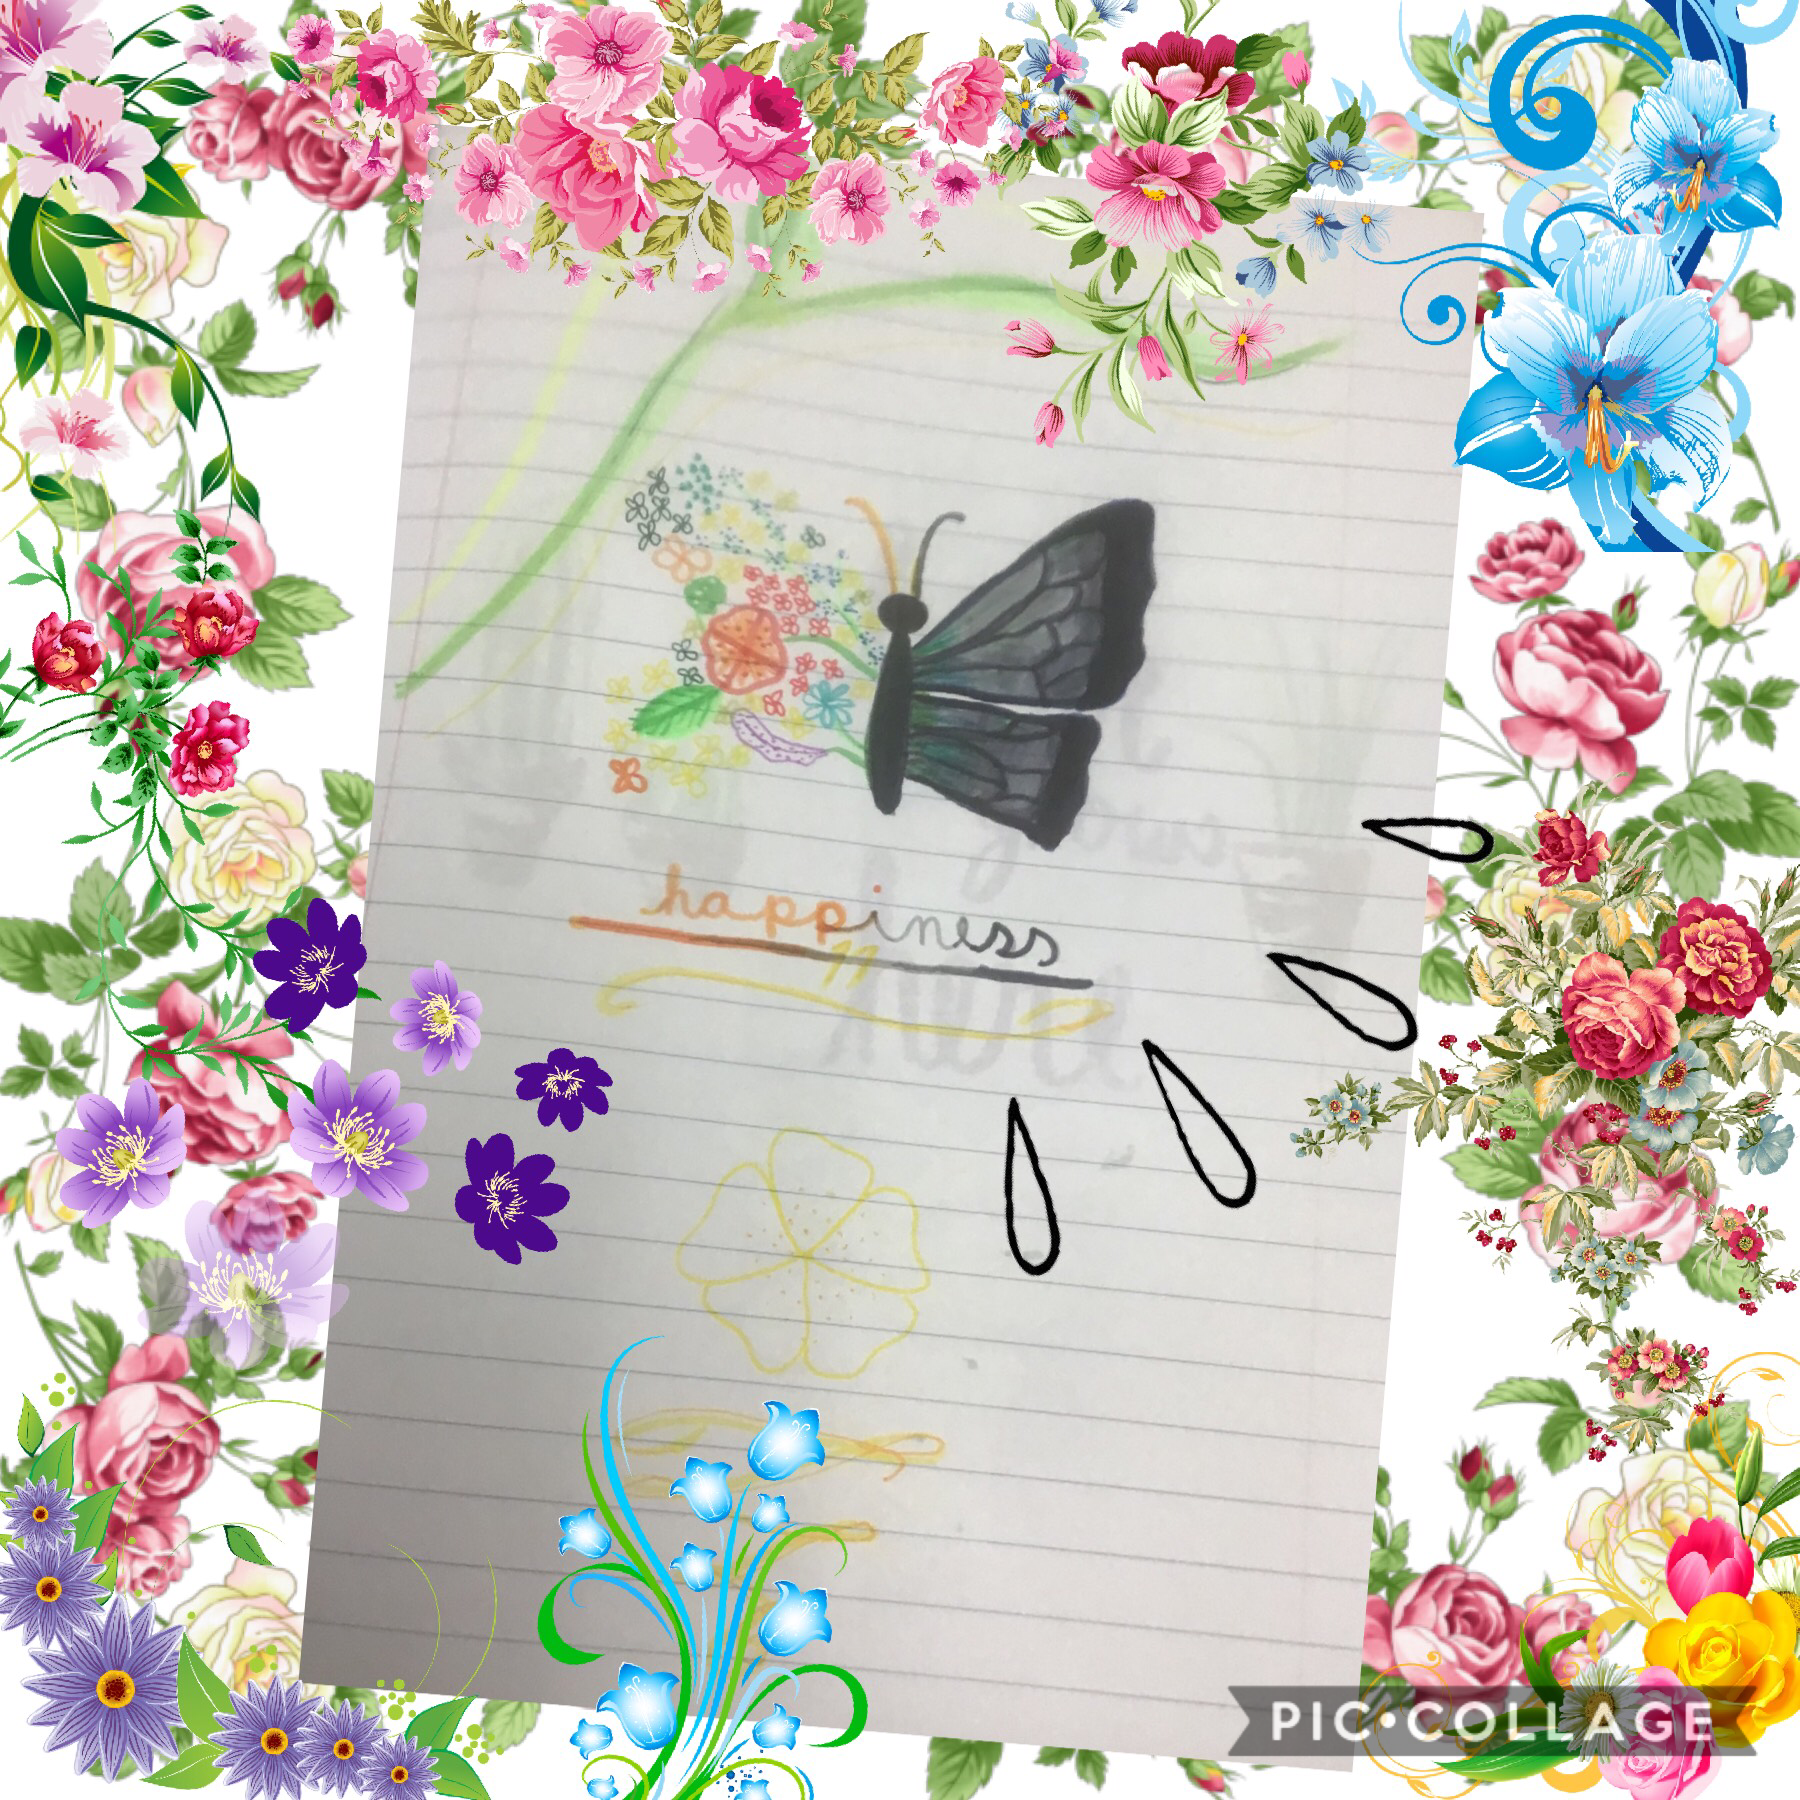 A Friend Of Mine Drew The Butterfly And Flower Picture